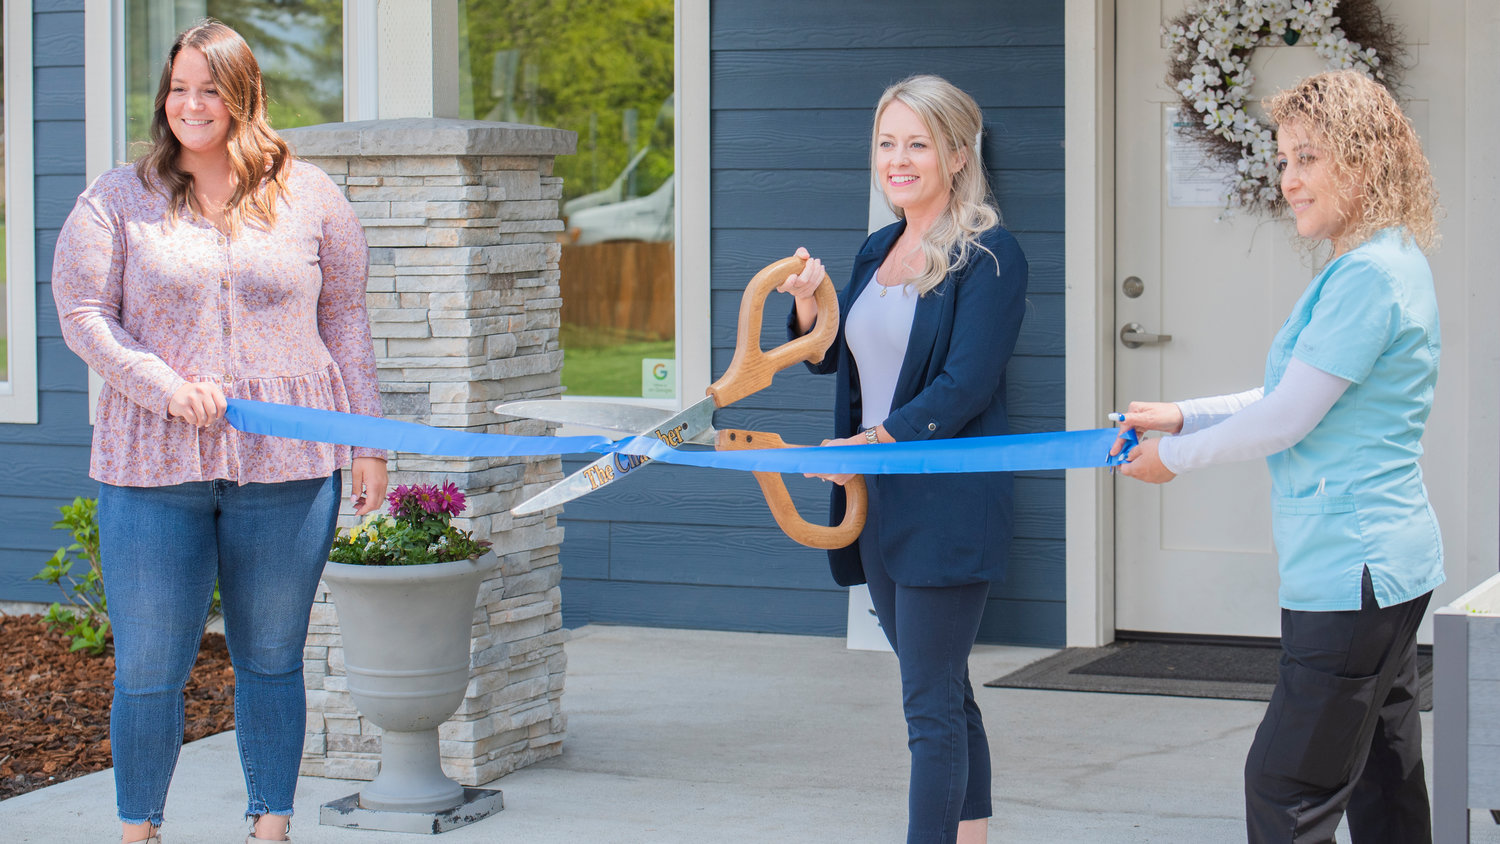 From left, Resident Care Manager Jahnel Otten, Owner RN Danae Elsner, and Caregiver Rosa Mejia smile and pose during a Centralia-Chehalis Chamber of Commerce Ribbon Cutting event at Silver Acres Adult Family Home in Chehalis on Wednesday.